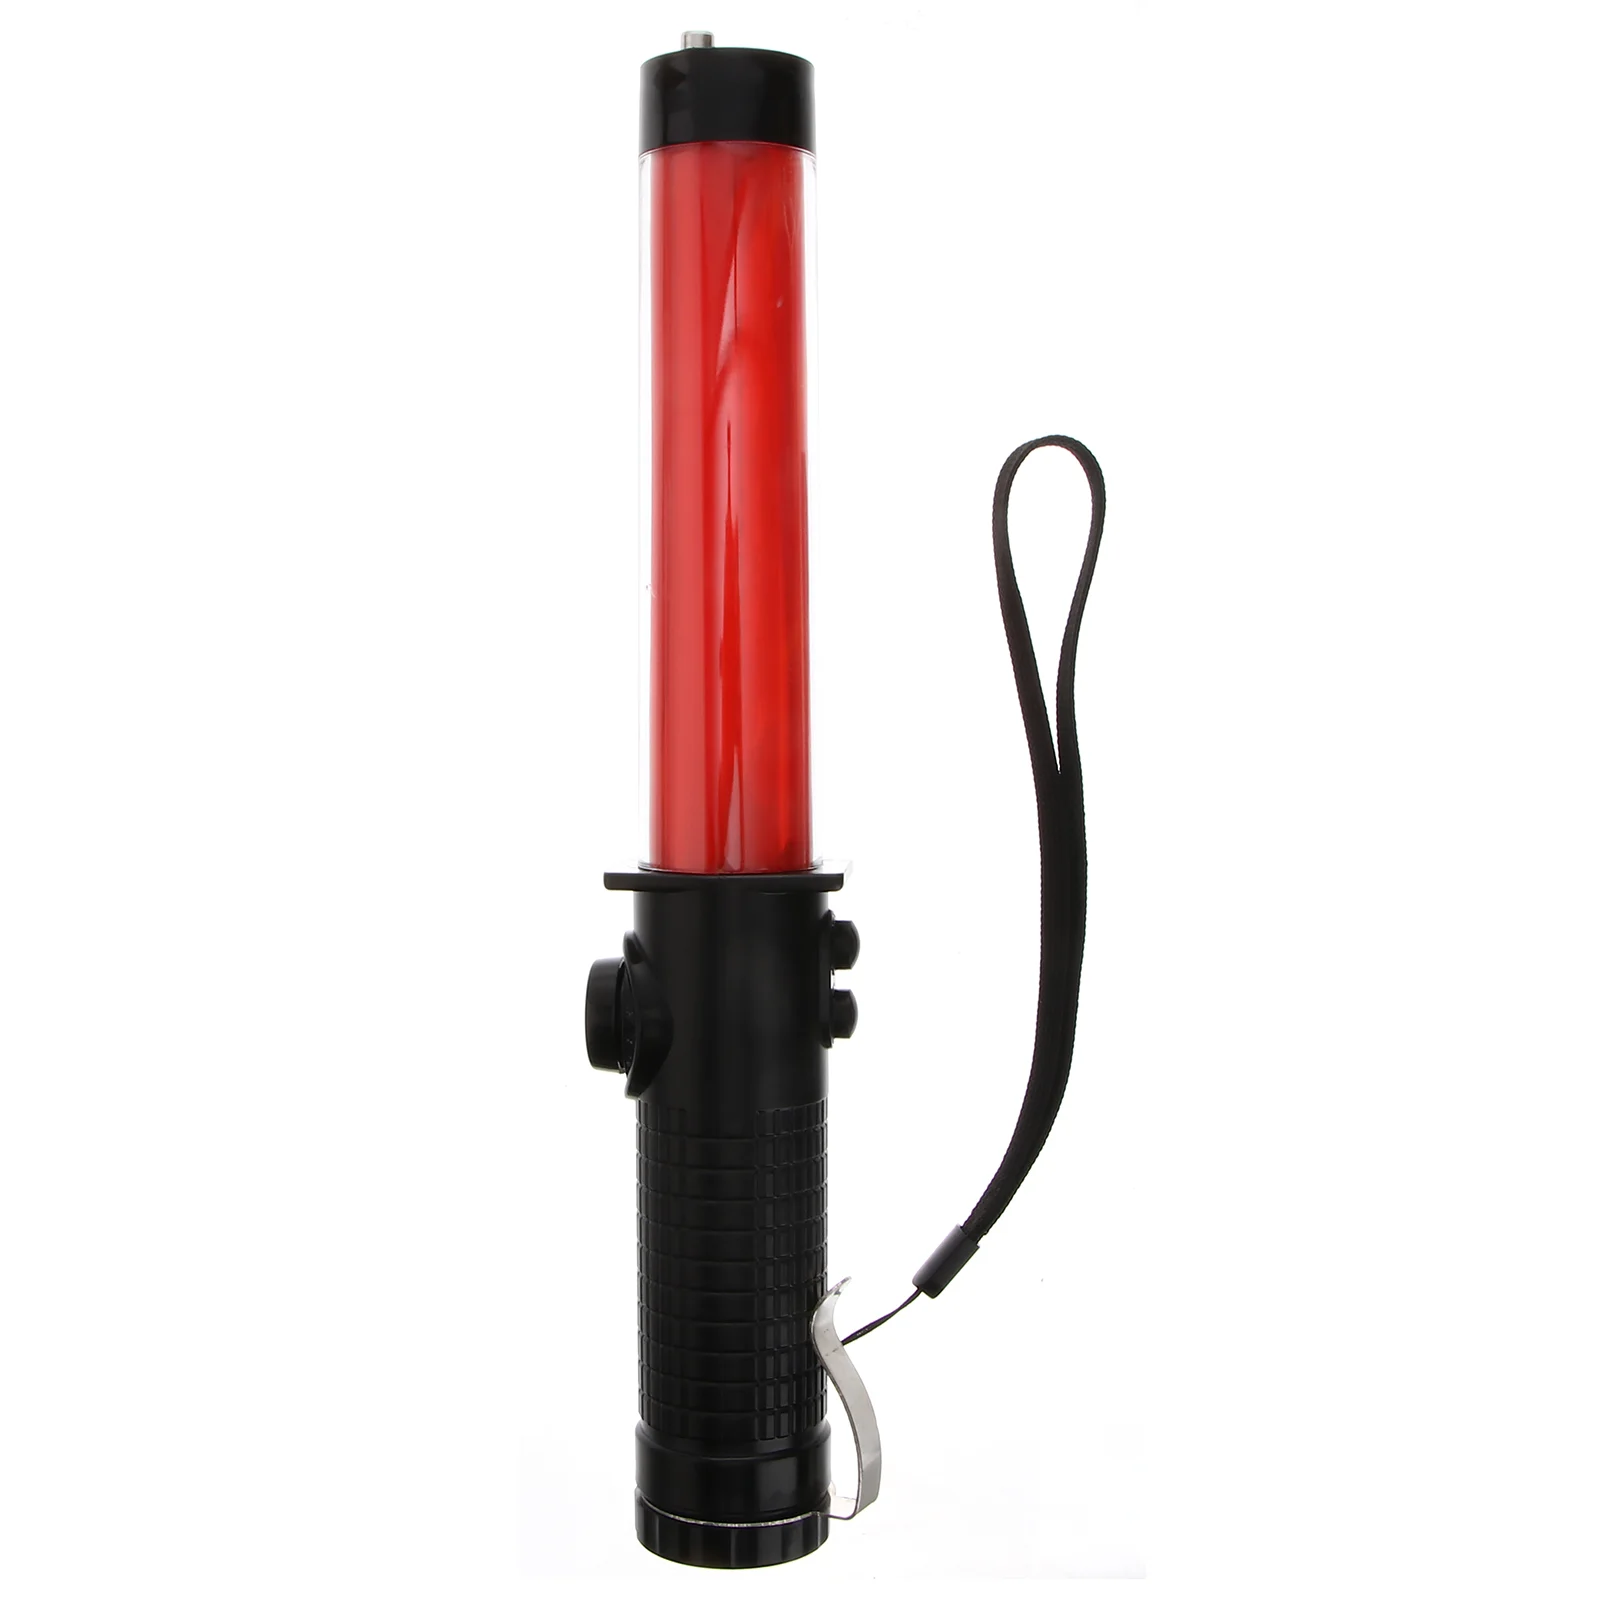 

Traffic Wand, Led Light Traffic Control Wand, Safety Traffic Light for Parking Guides Outdoor Camping with Wrist Strap Lanyard,